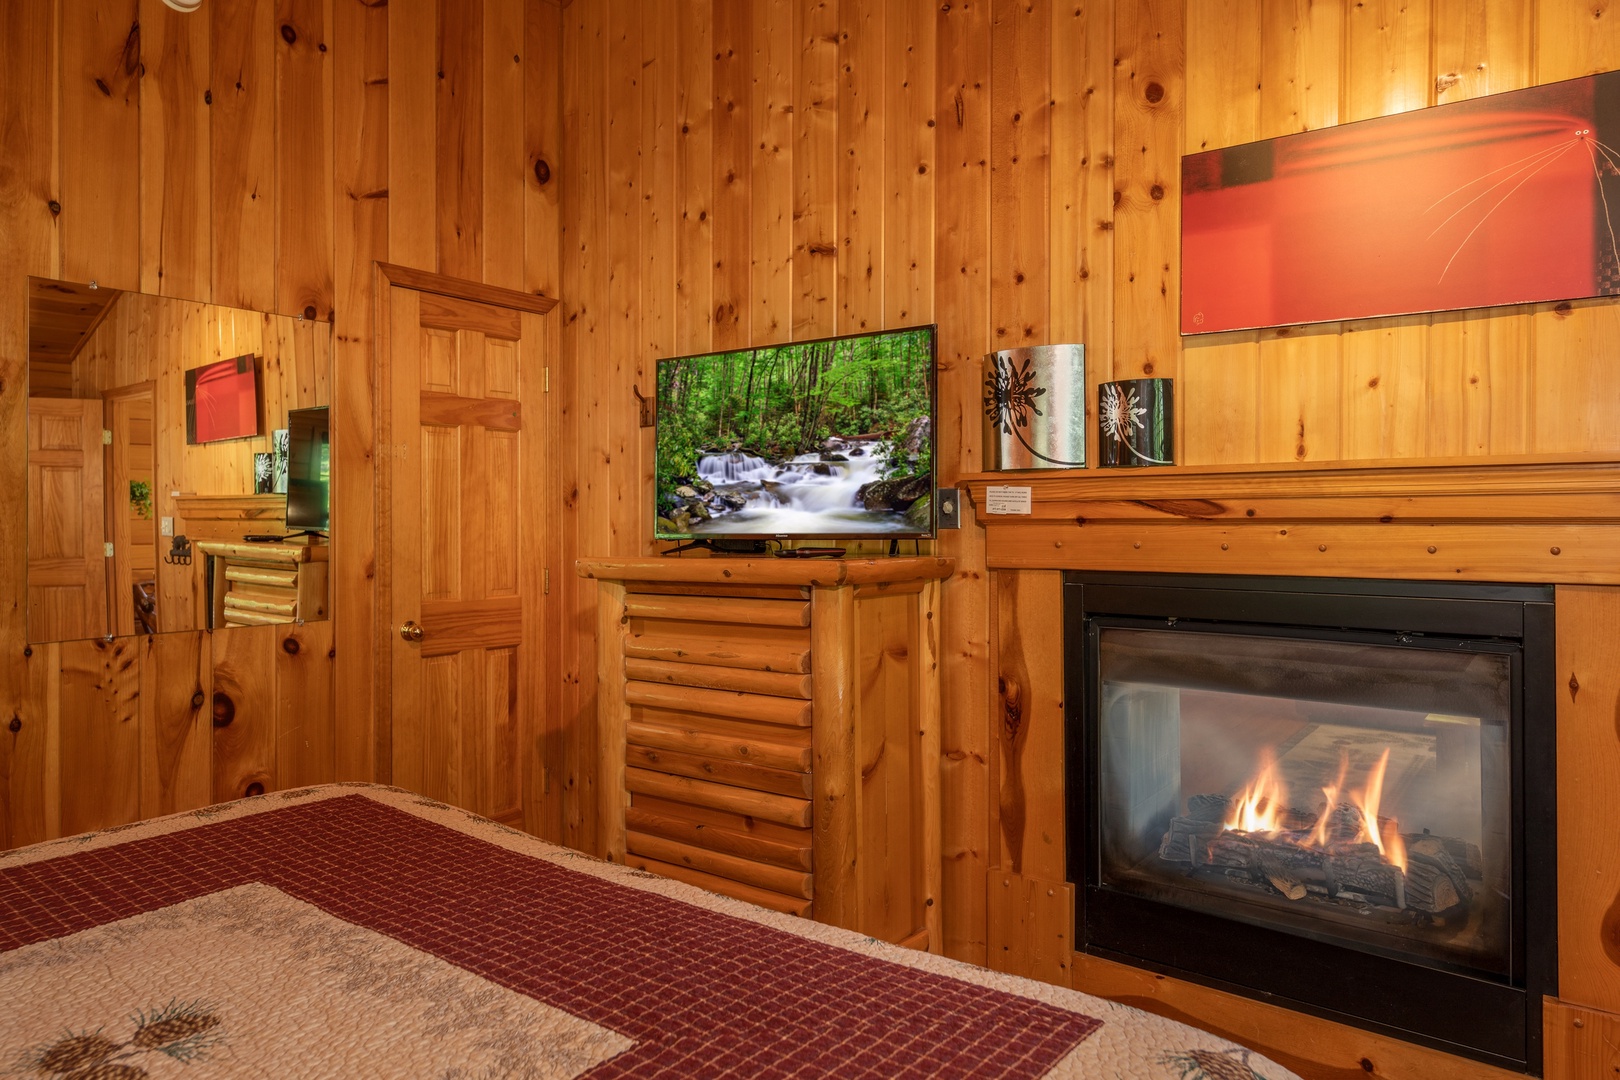 TV and fireplace in a bedroom at Hello Dolly, a 1 bedroom cabin rental located in Pigeon Forge